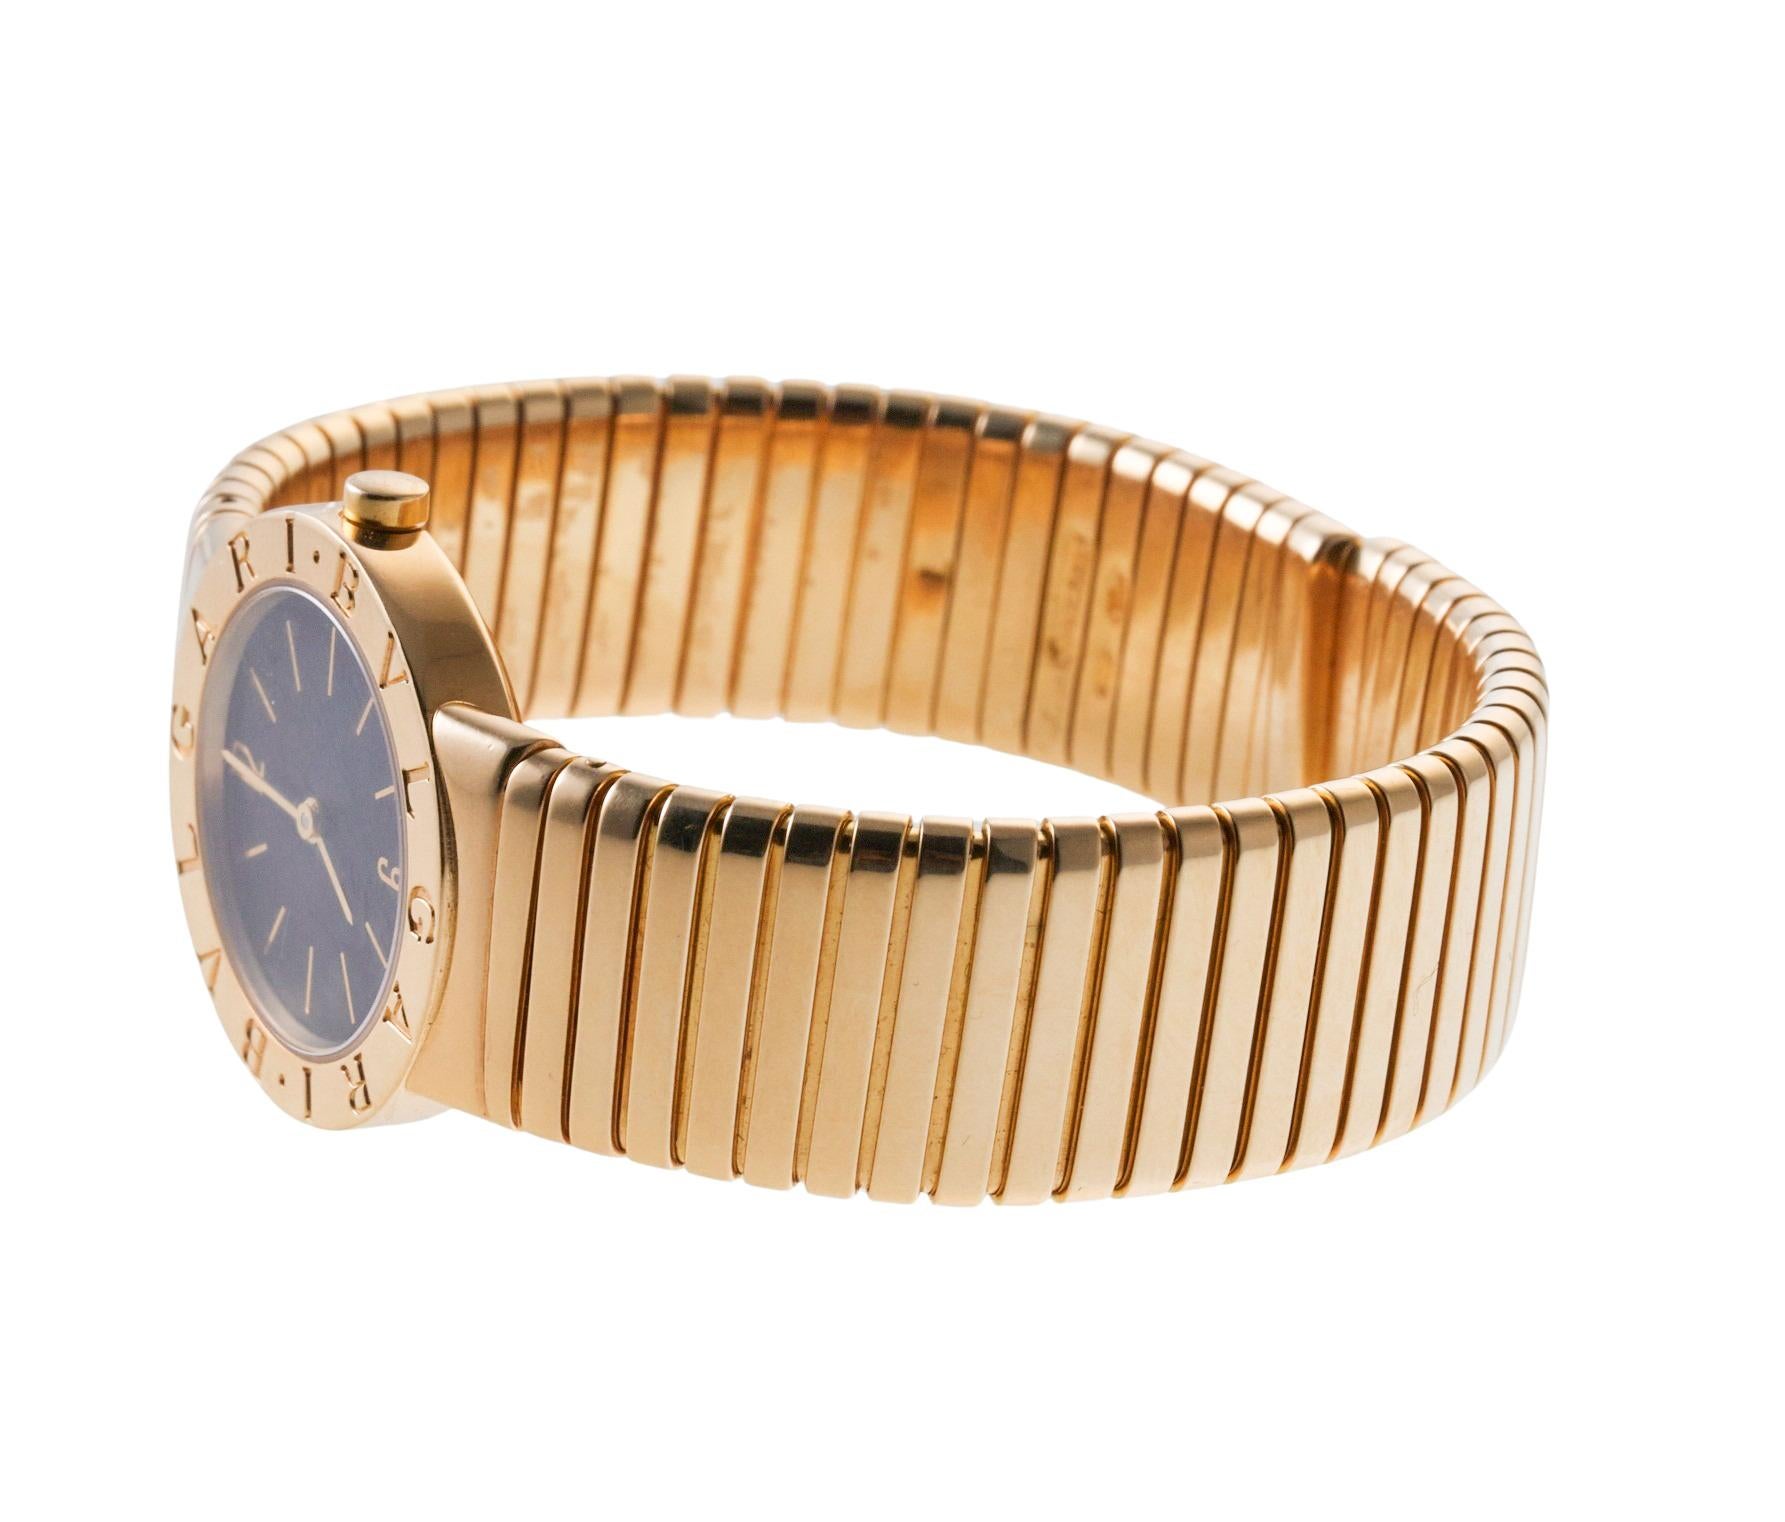 Bvlgari Tubogas 18k gold watch bracelet, featuring slightly flexible design. Bracelet will fit approx. 7